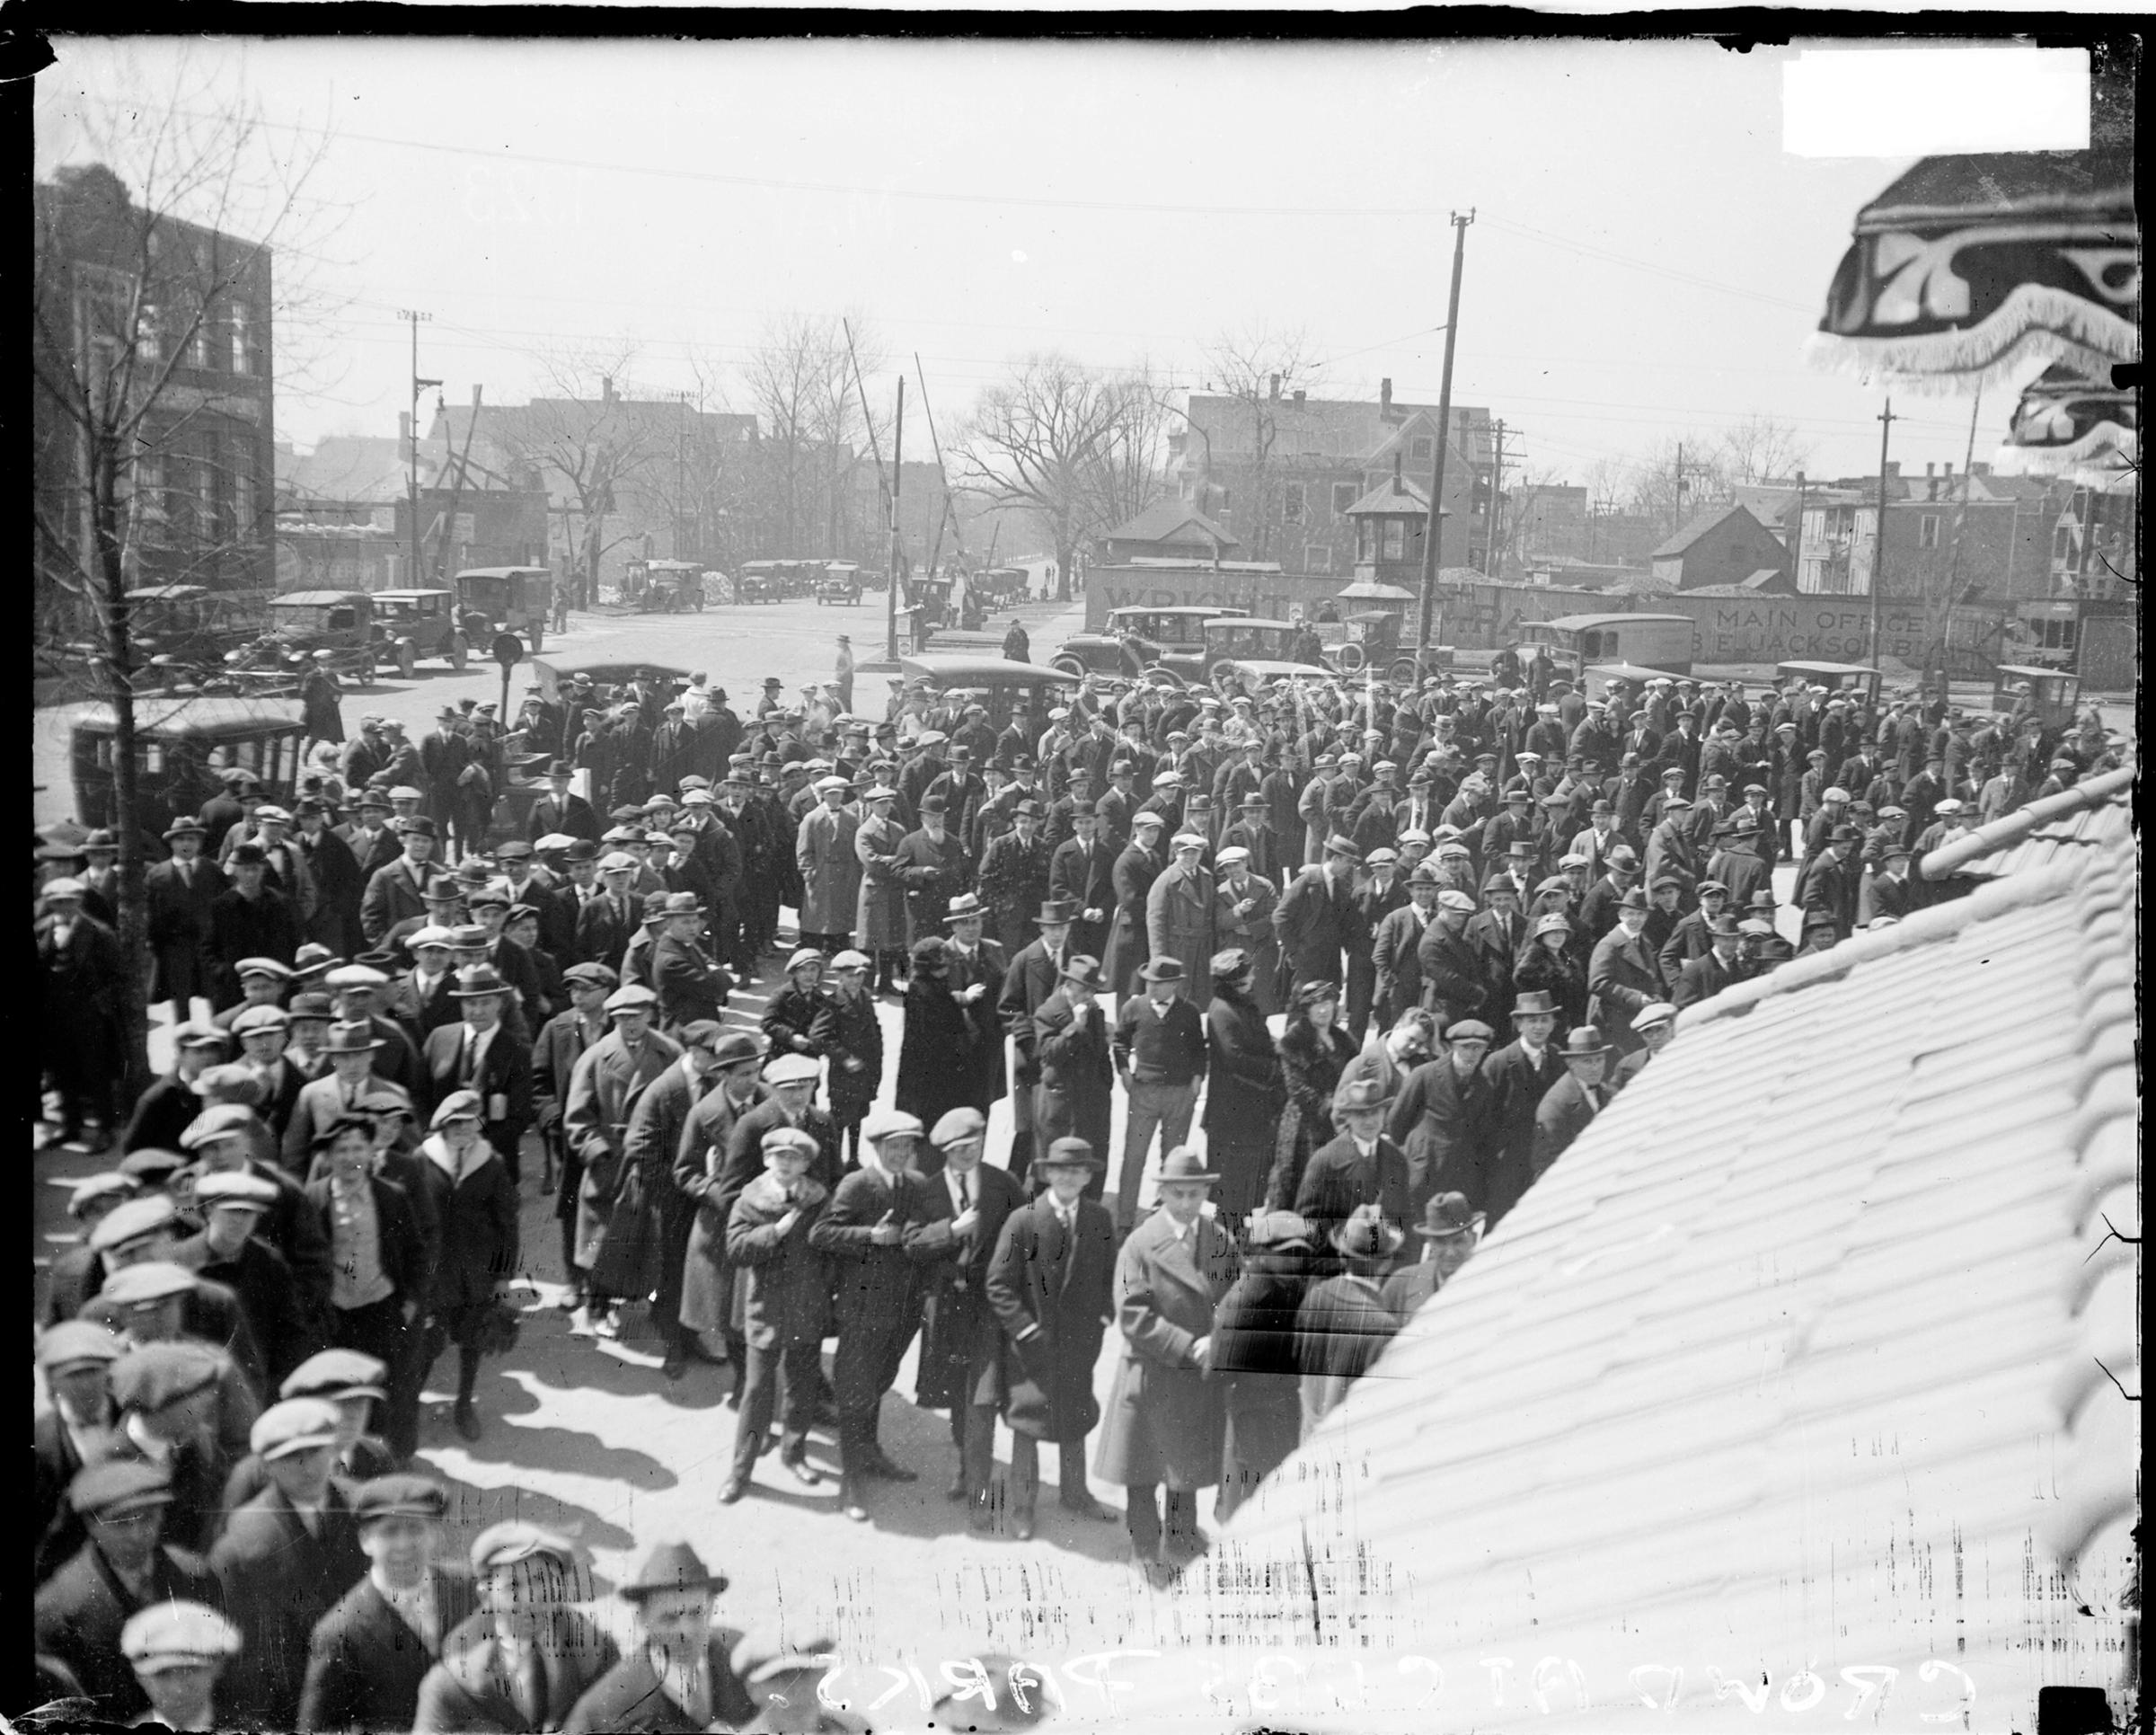 Crowds waiting in lines outside Weeghman Park, Chicago, Illinois, 1923. Weeghman Park was renamed Wrigley FIeld in 1927. From the Chicago Daily News collection.